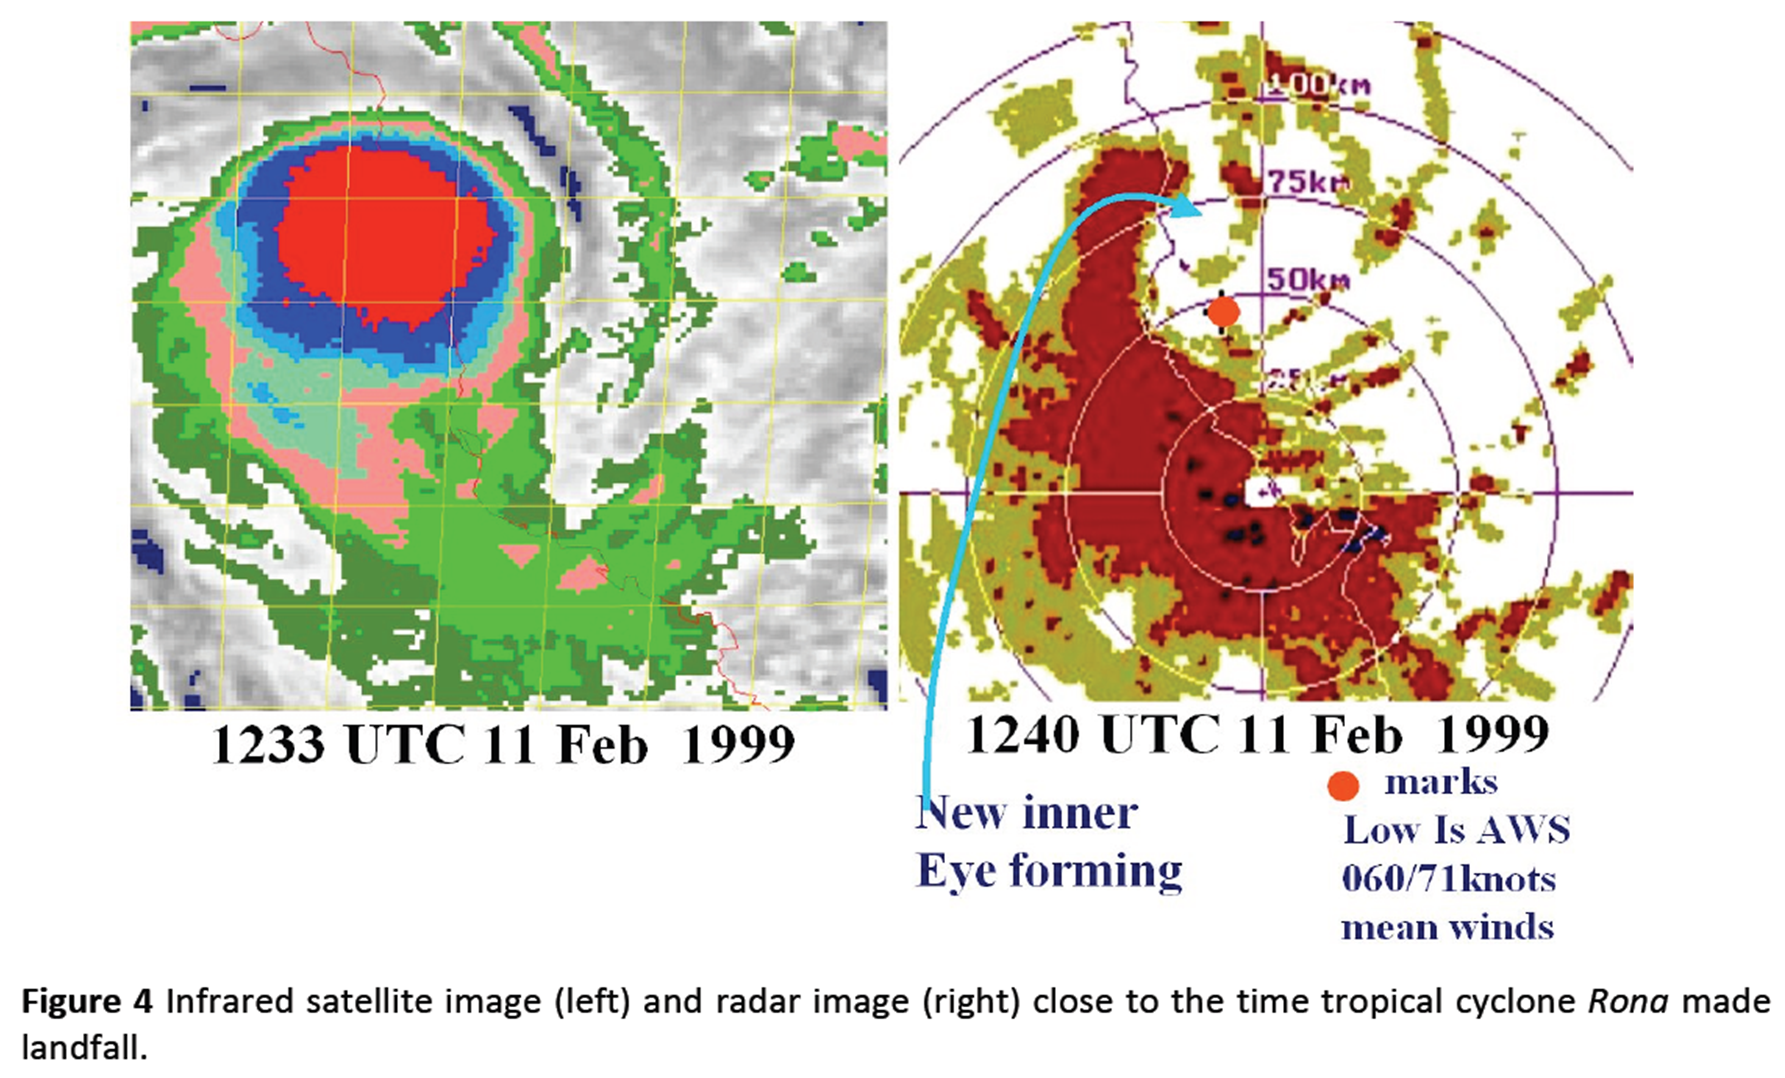 Infrared satellite image (left) and radar image (right) close to the time tropical cyclone Rona made landfall.